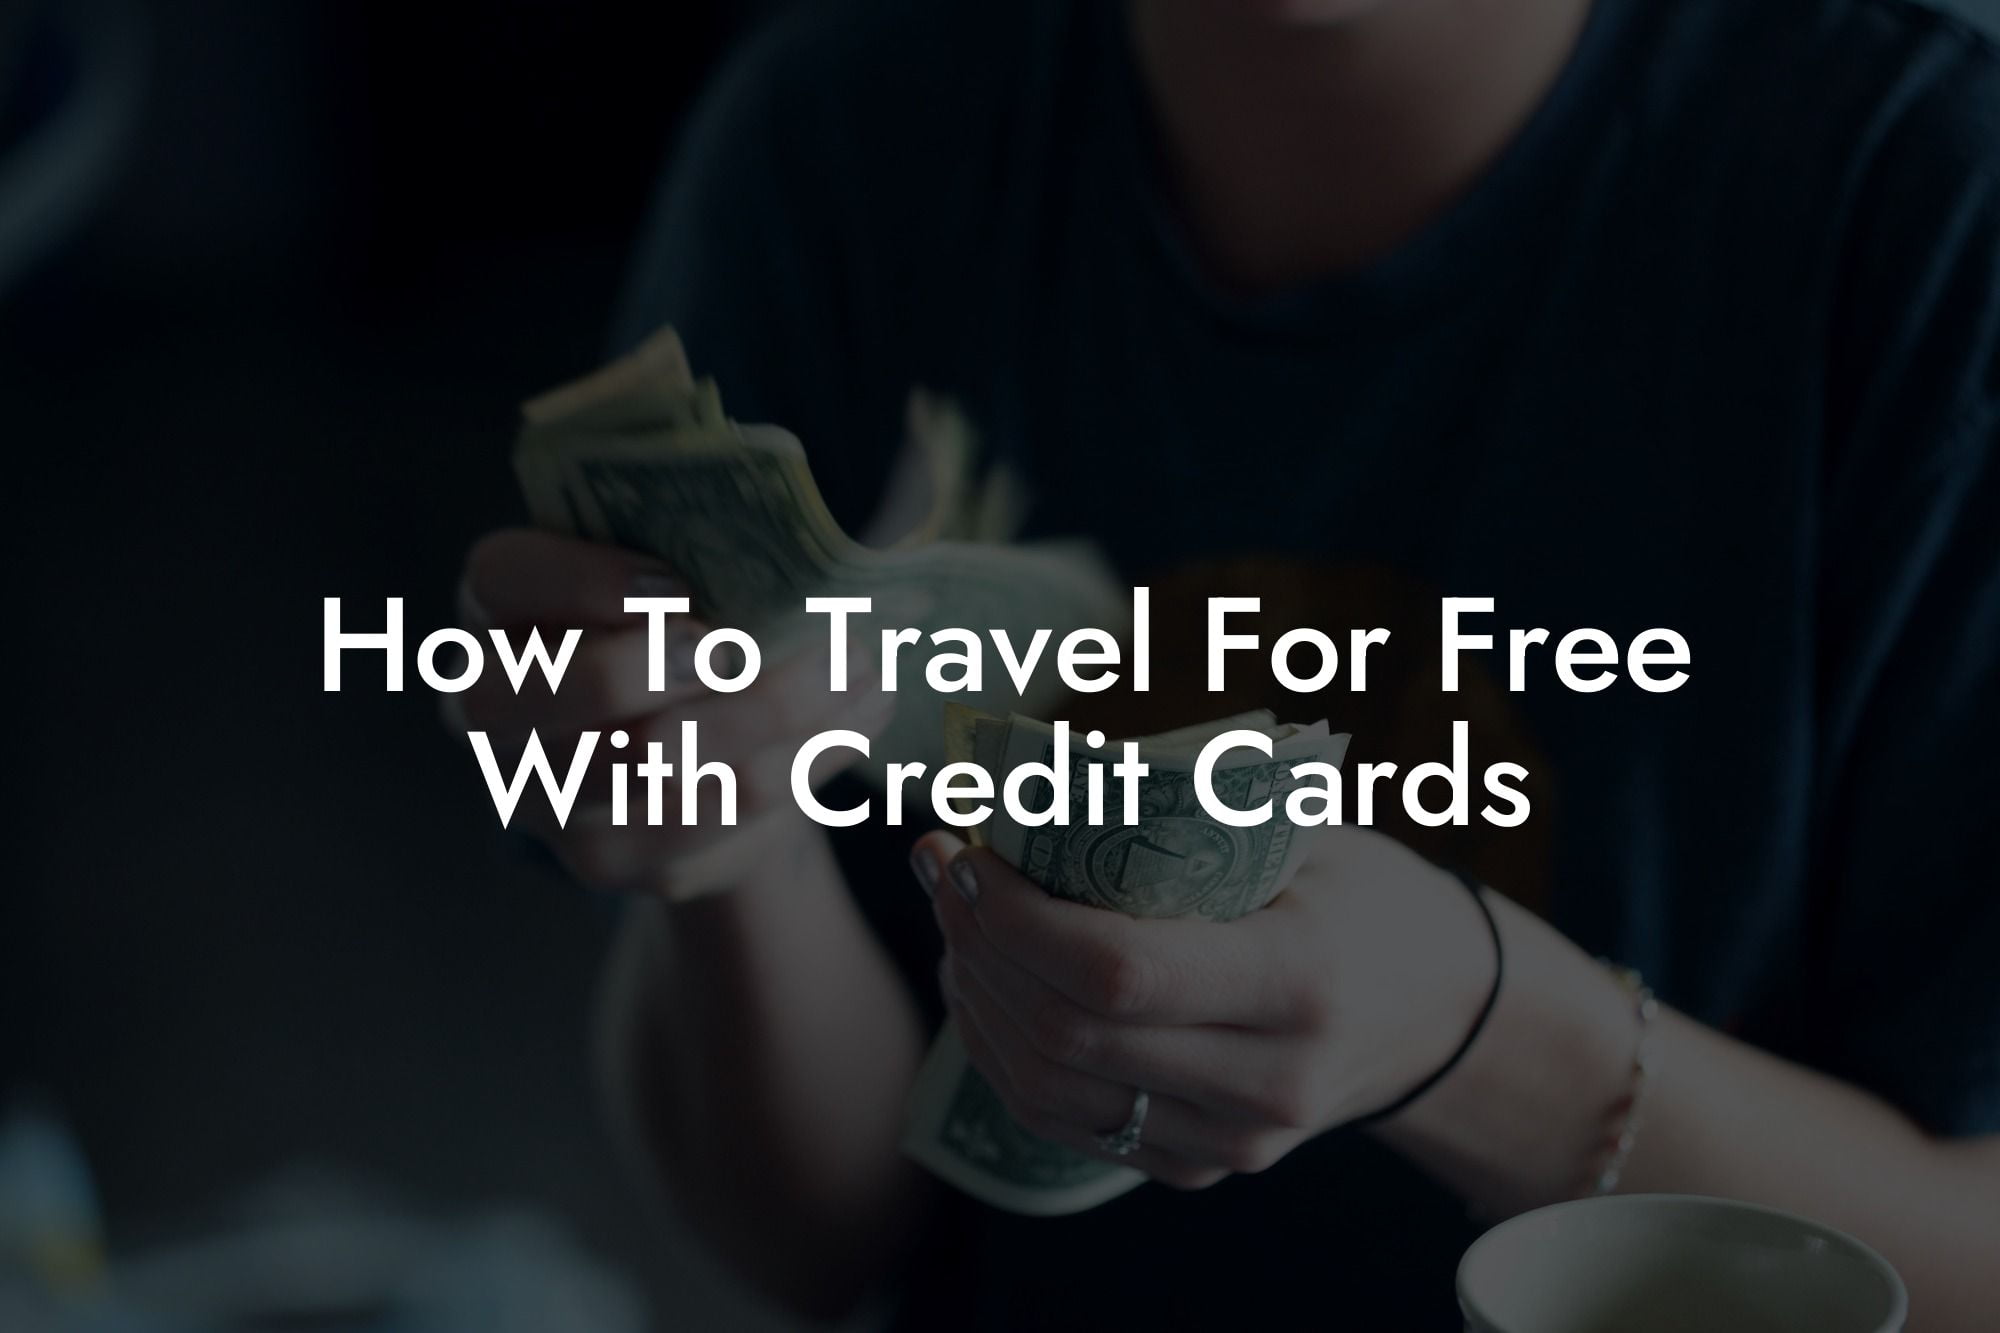 How To Travel For Free With Credit Cards